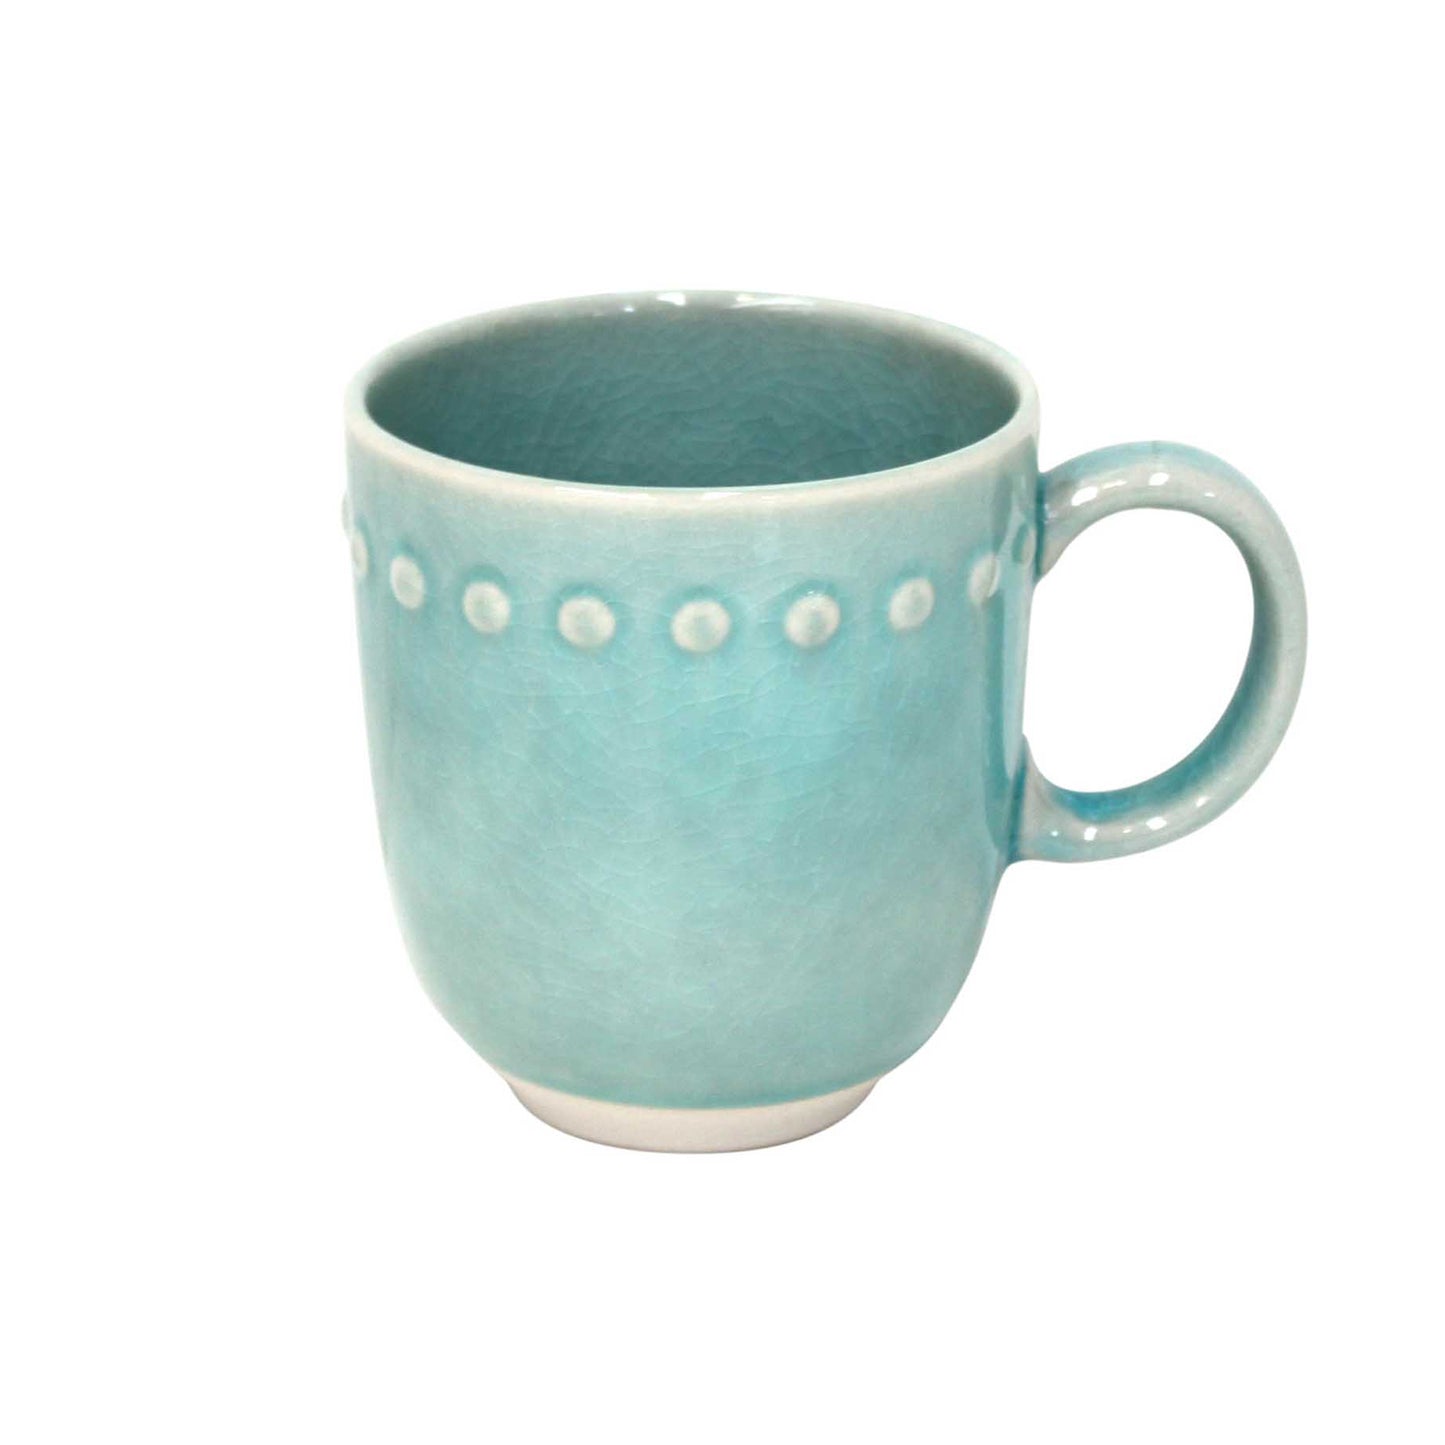 a cracked turquoise mug with embossed spots around the rim